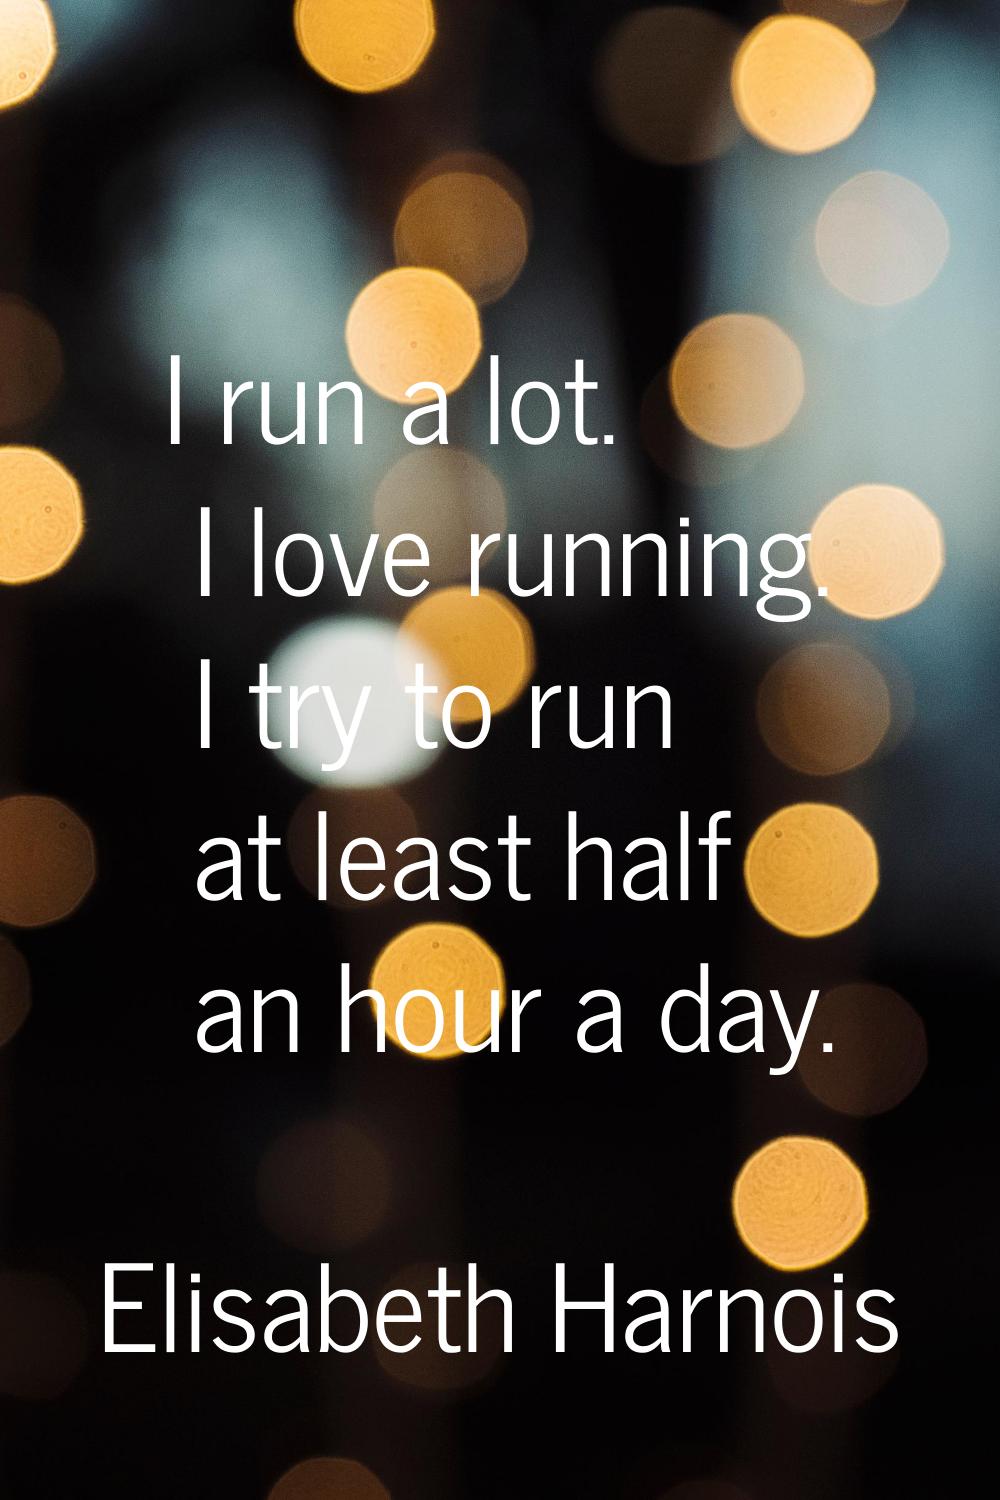 I run a lot. I love running. I try to run at least half an hour a day.